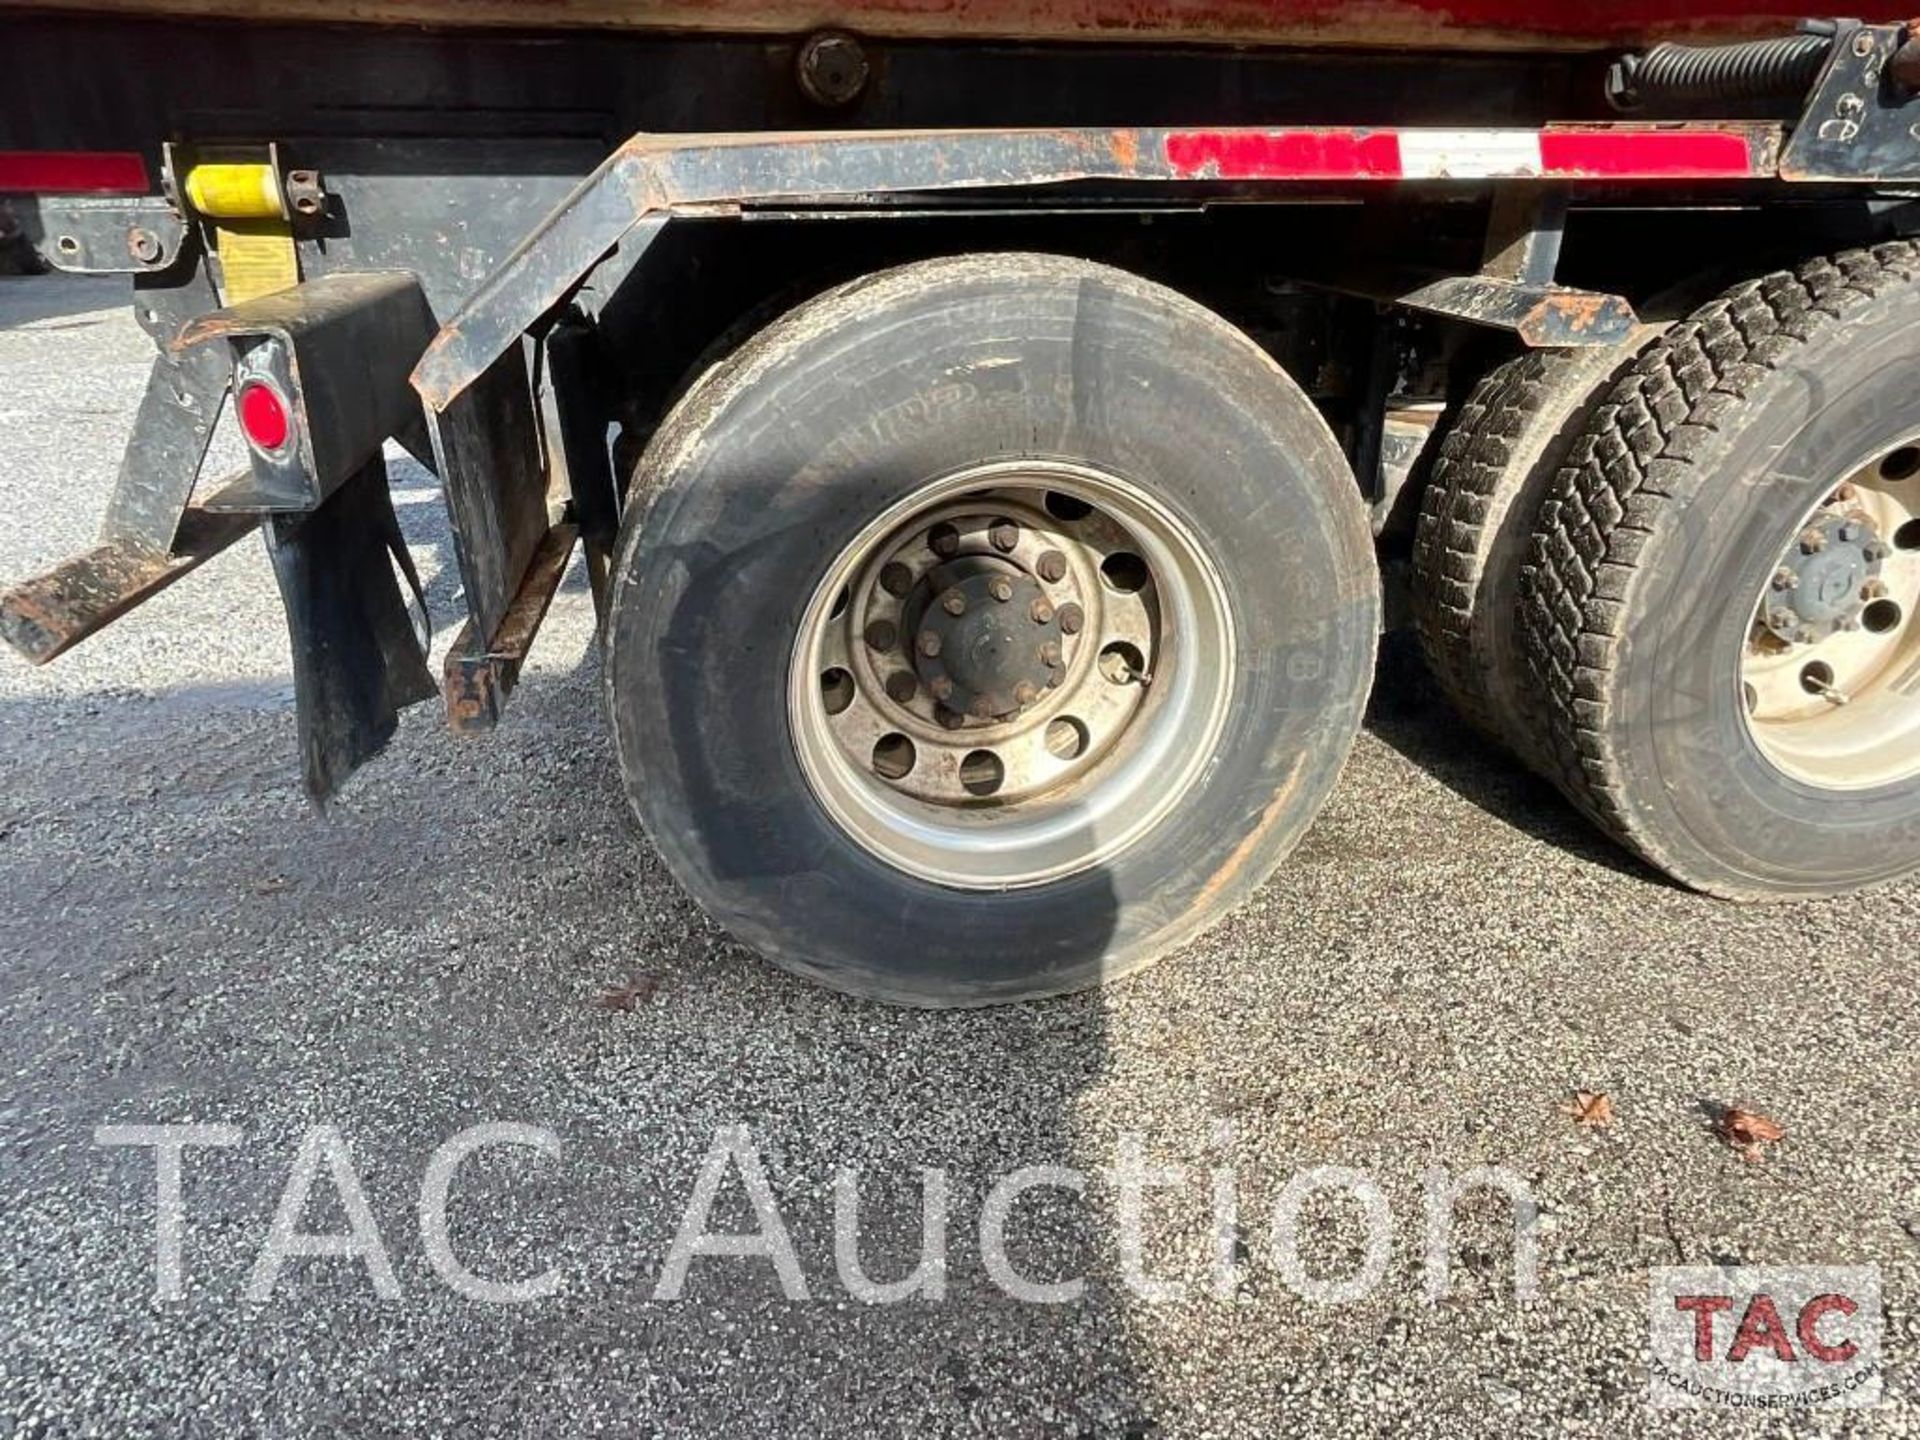 2012 CAT CT660S Roll-Off Truck W/ 20yd Dumpster - Image 120 of 148